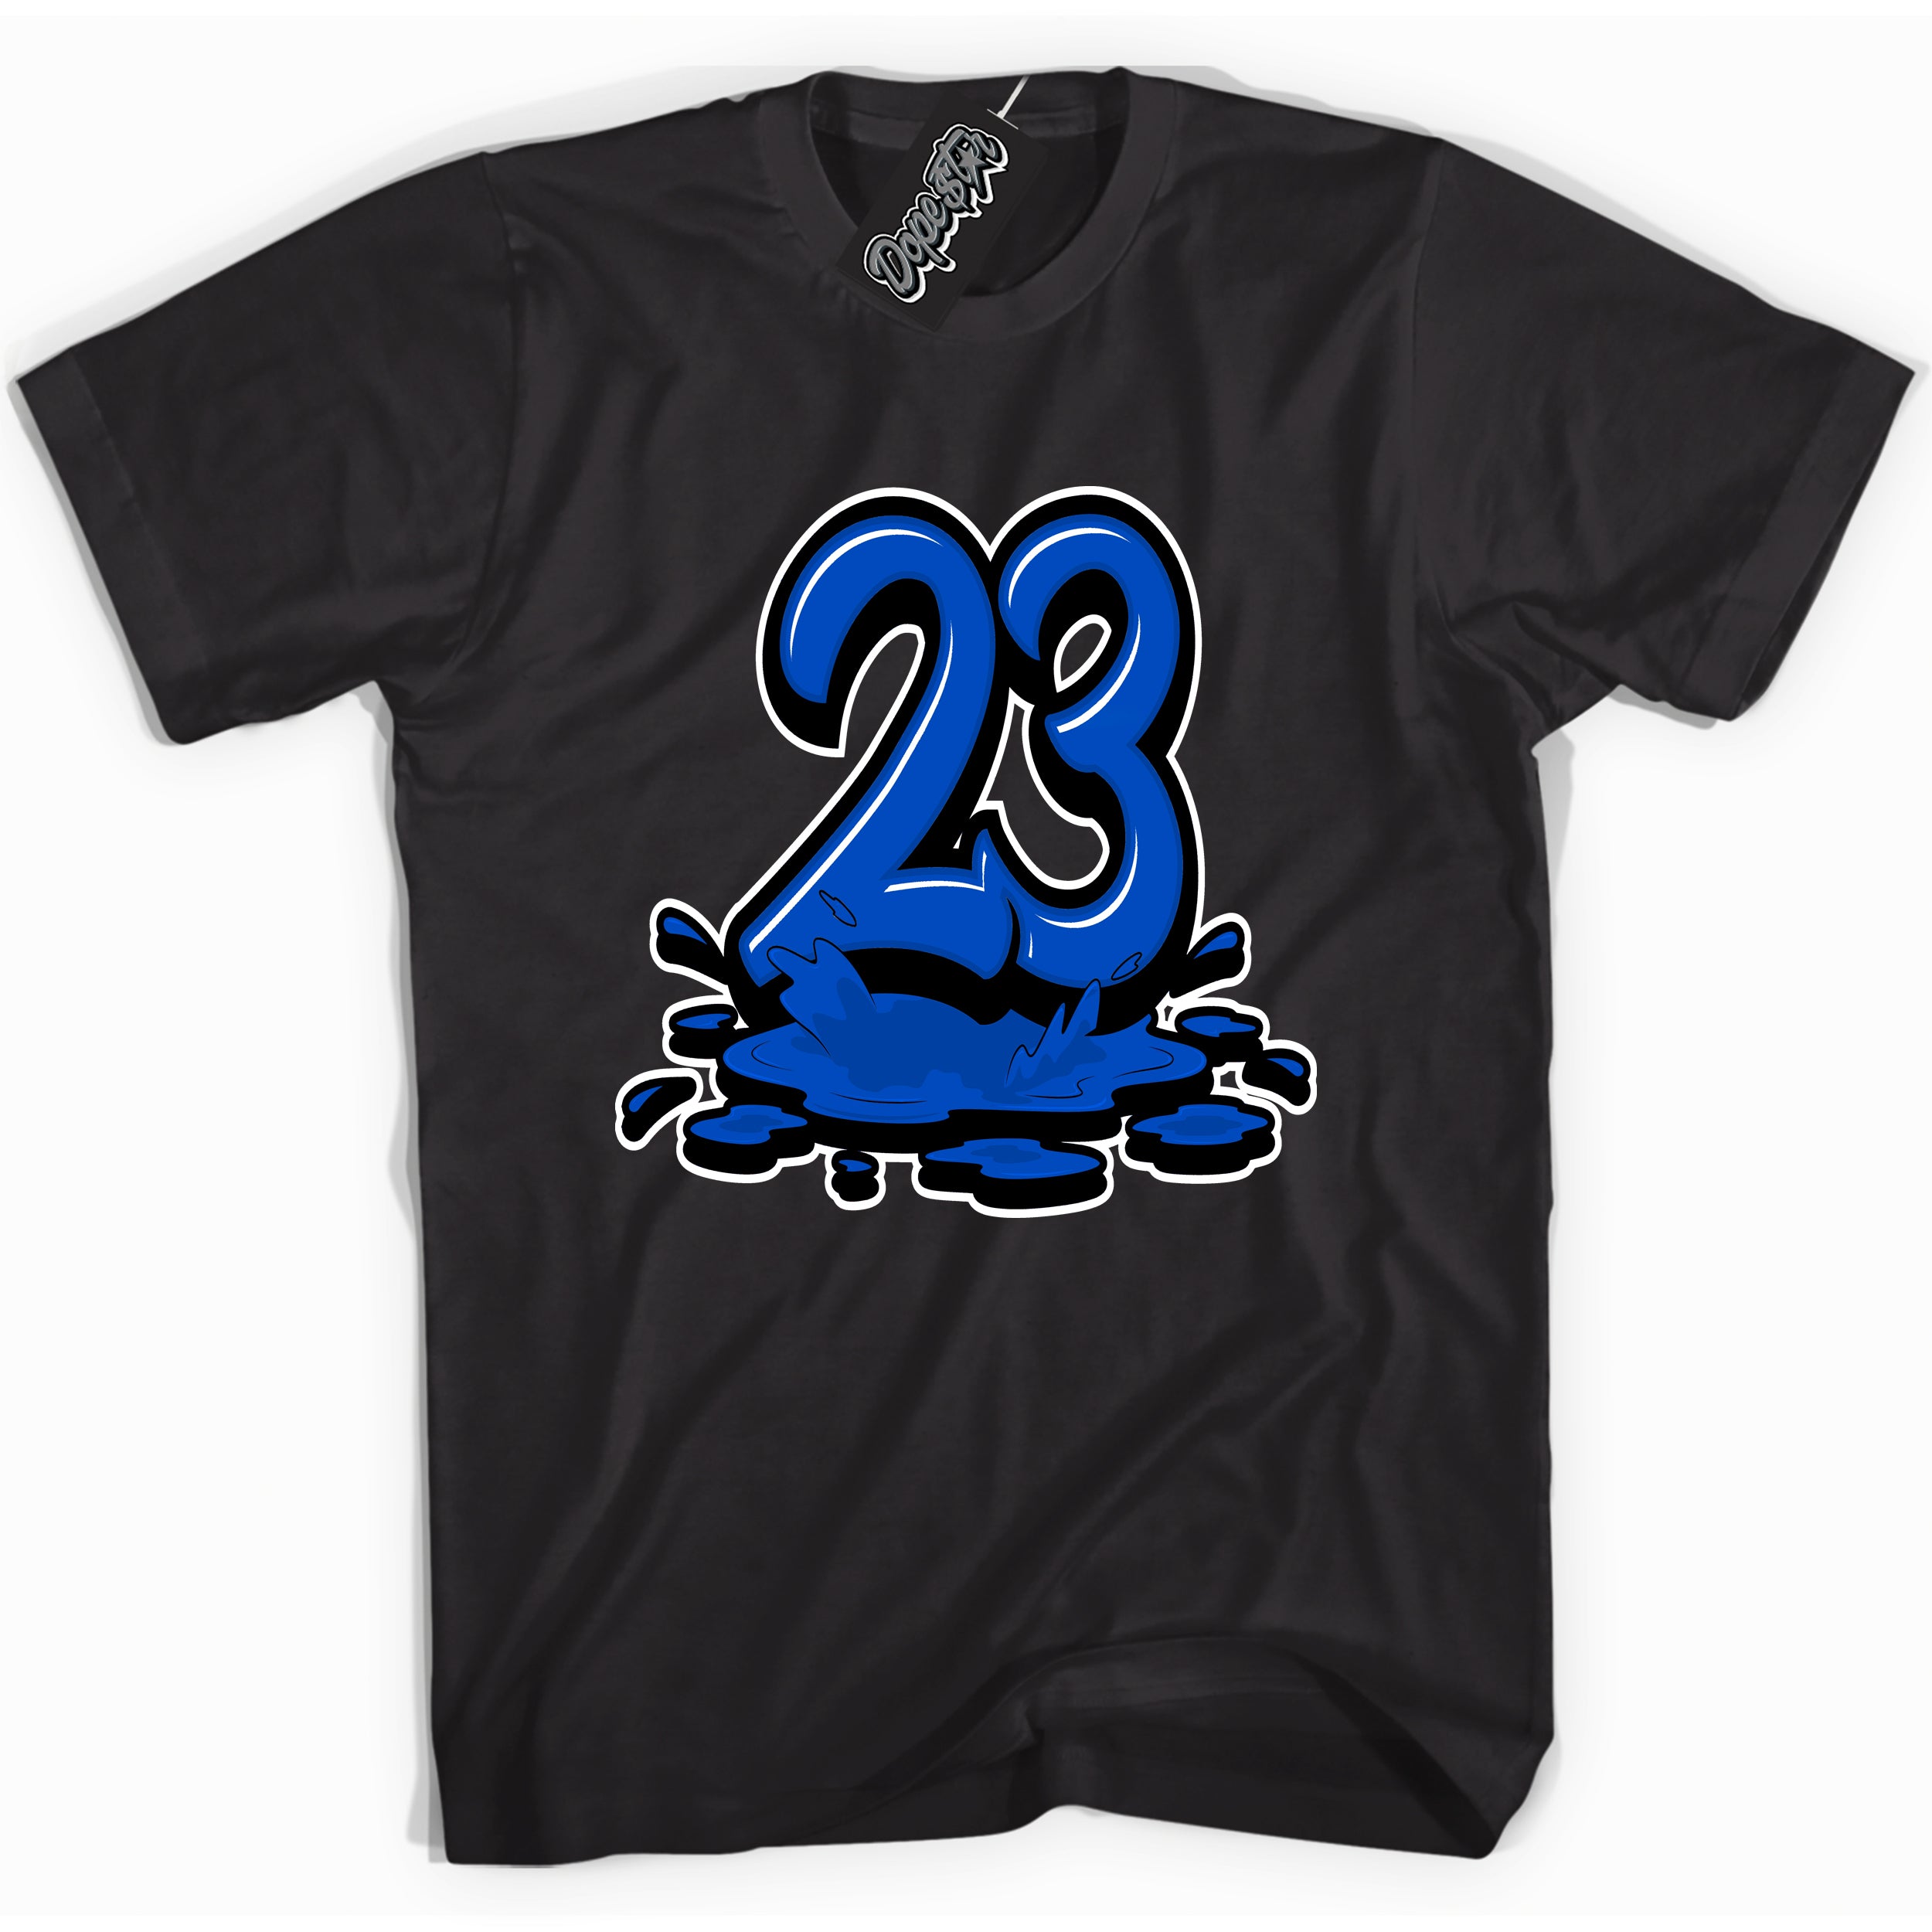 Cool Black graphic tee with "23 Melting" design, that perfectly matches Royal Reimagined 1s sneakers 